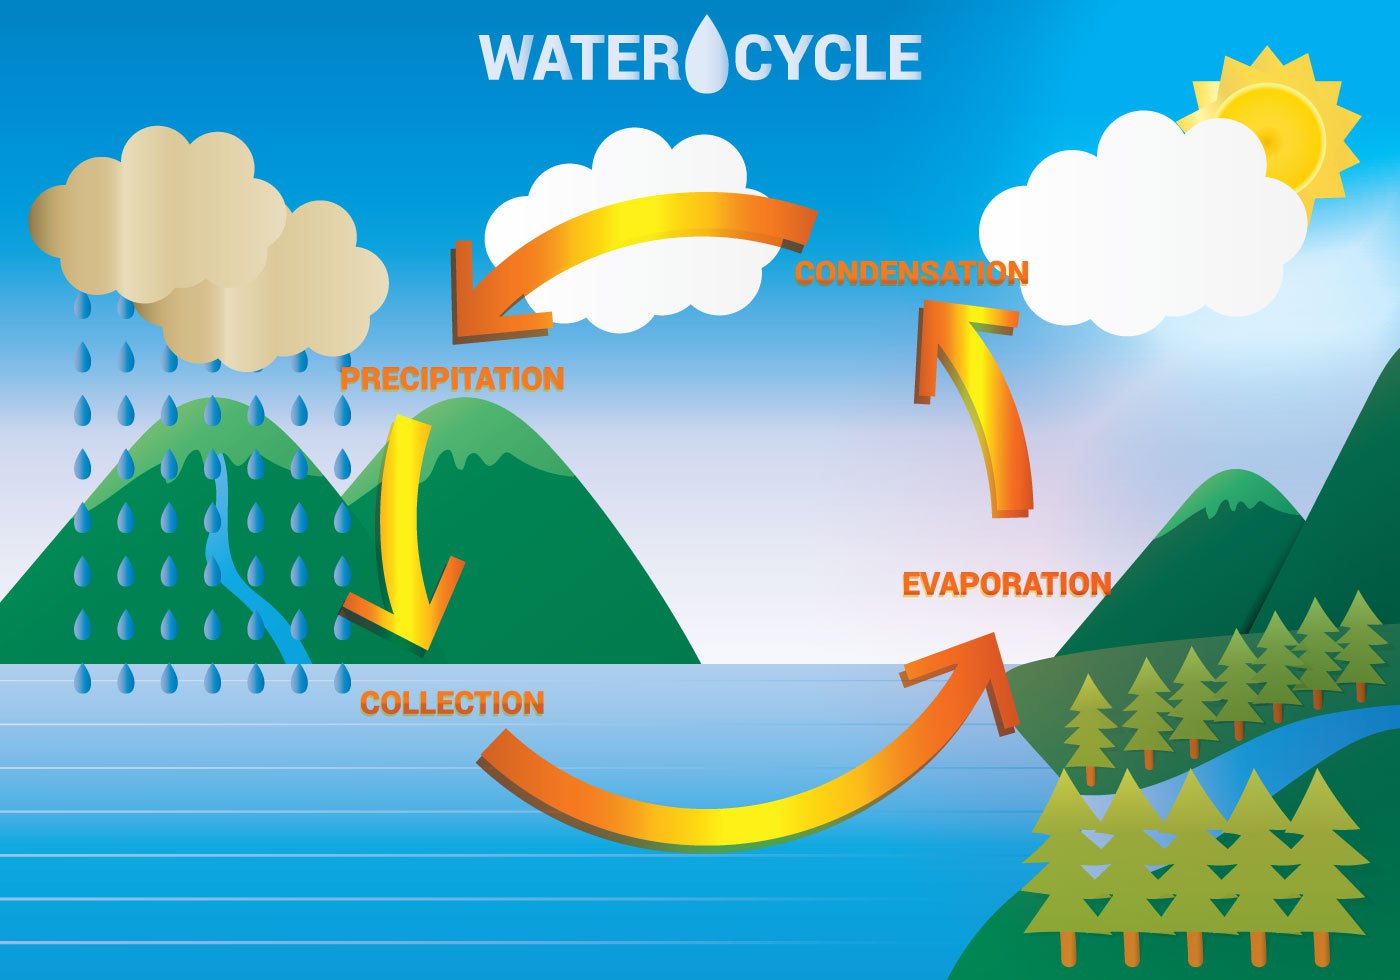 What is the water cycle? - The Water Cycle